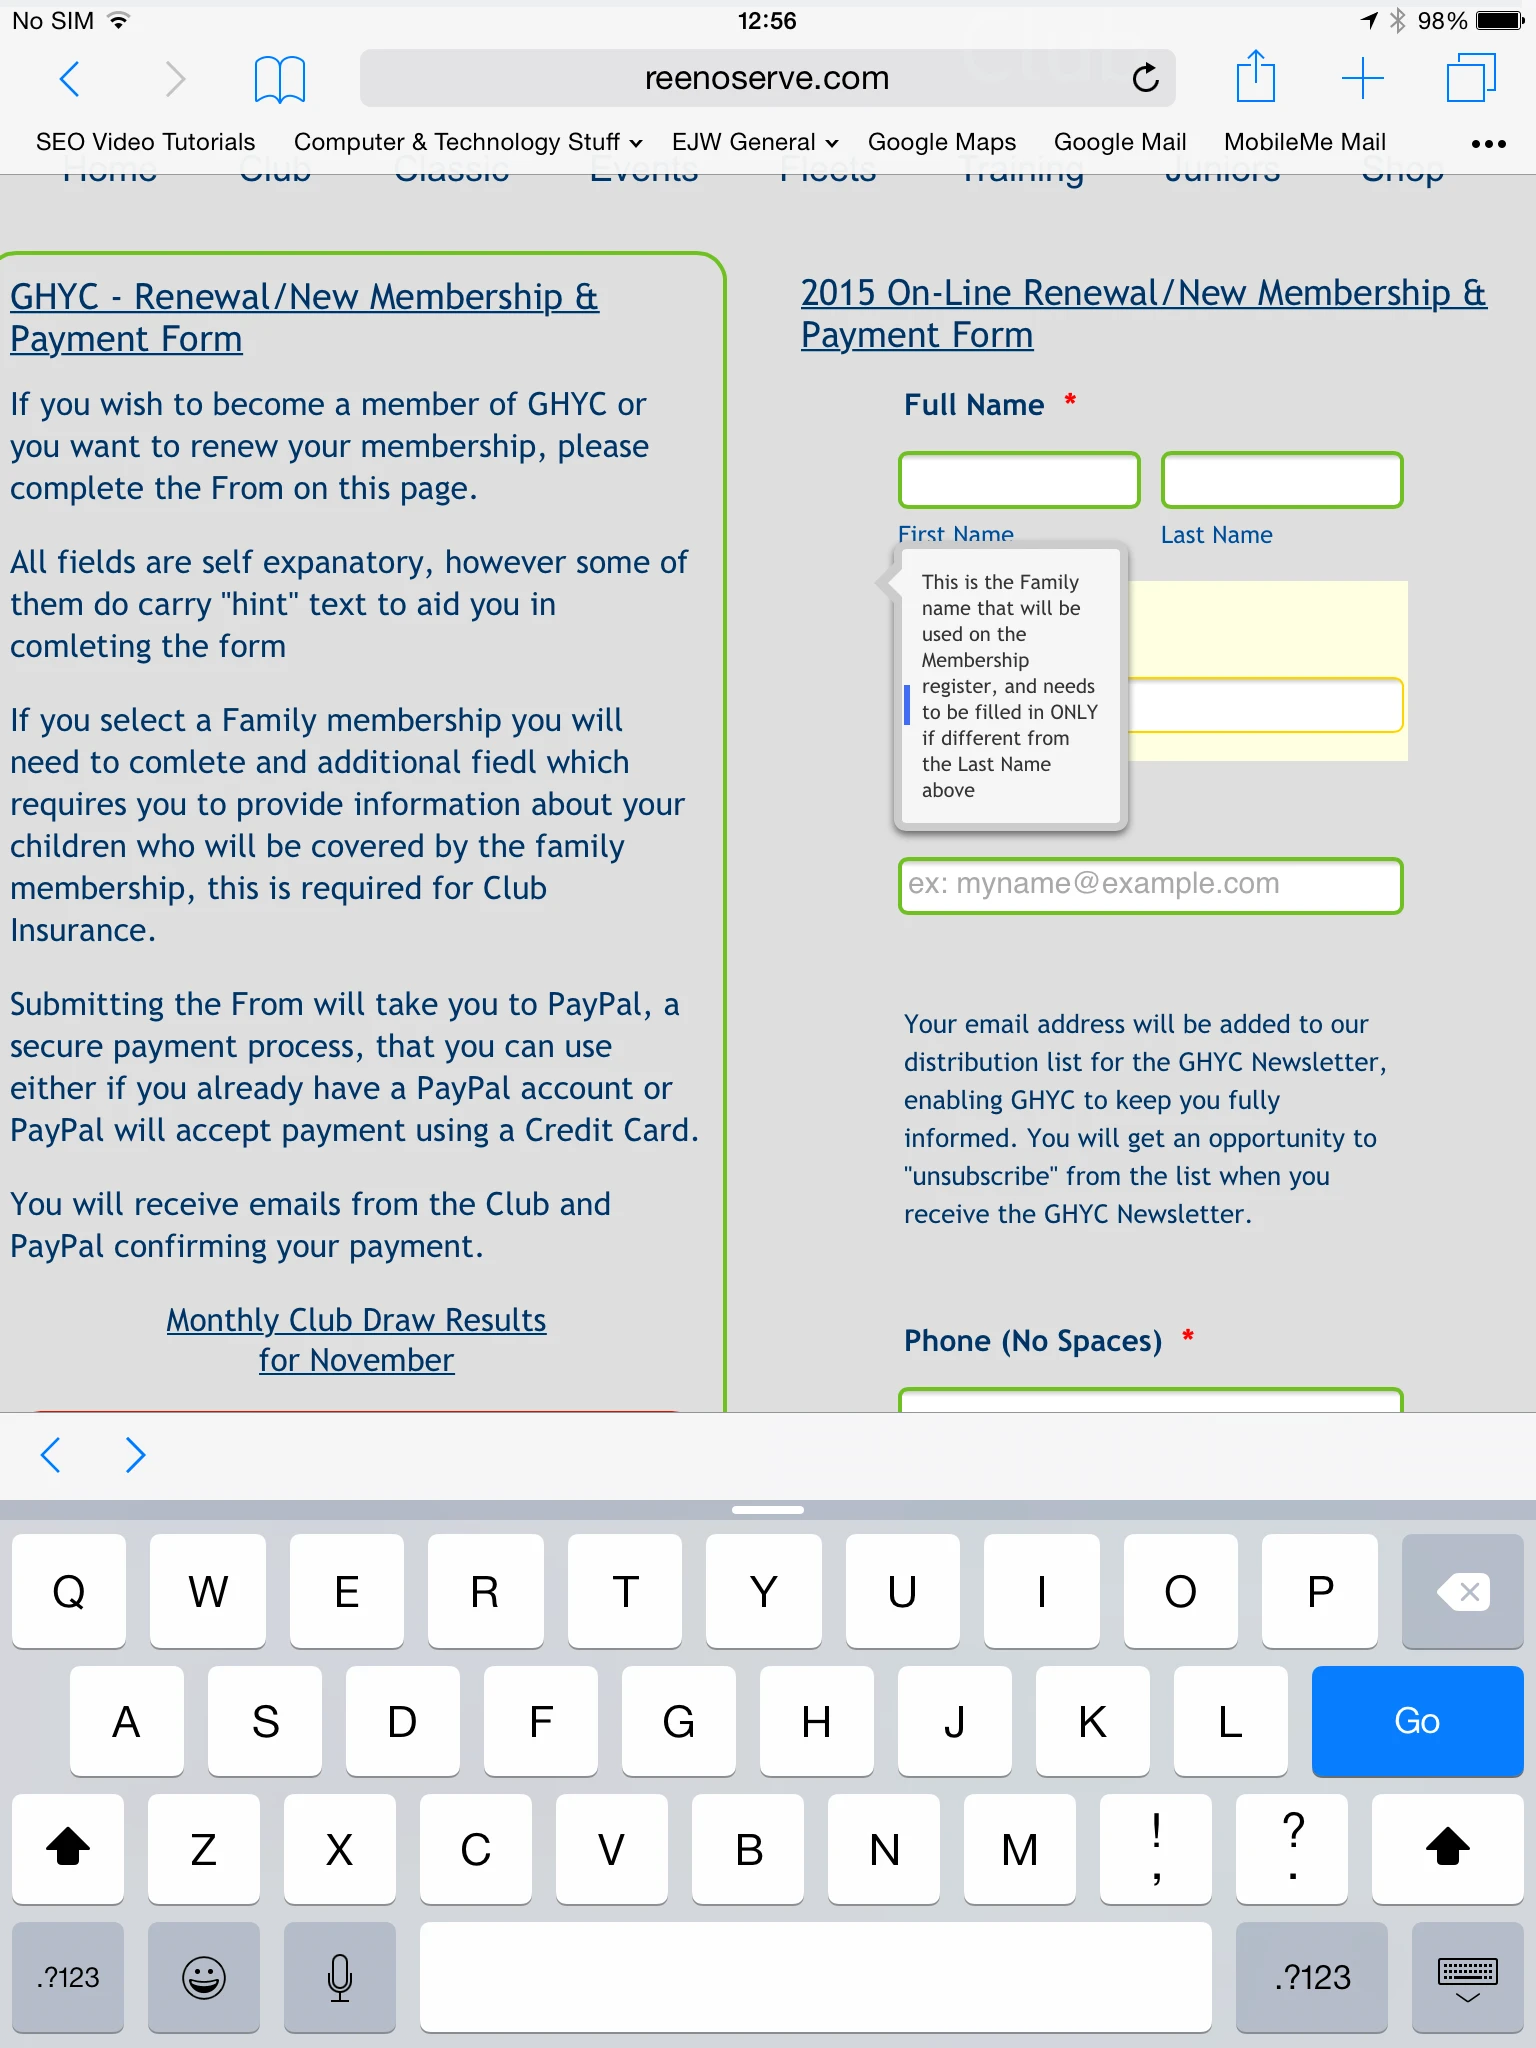 Responsive Form and Hover Text Image 1 Screenshot 20